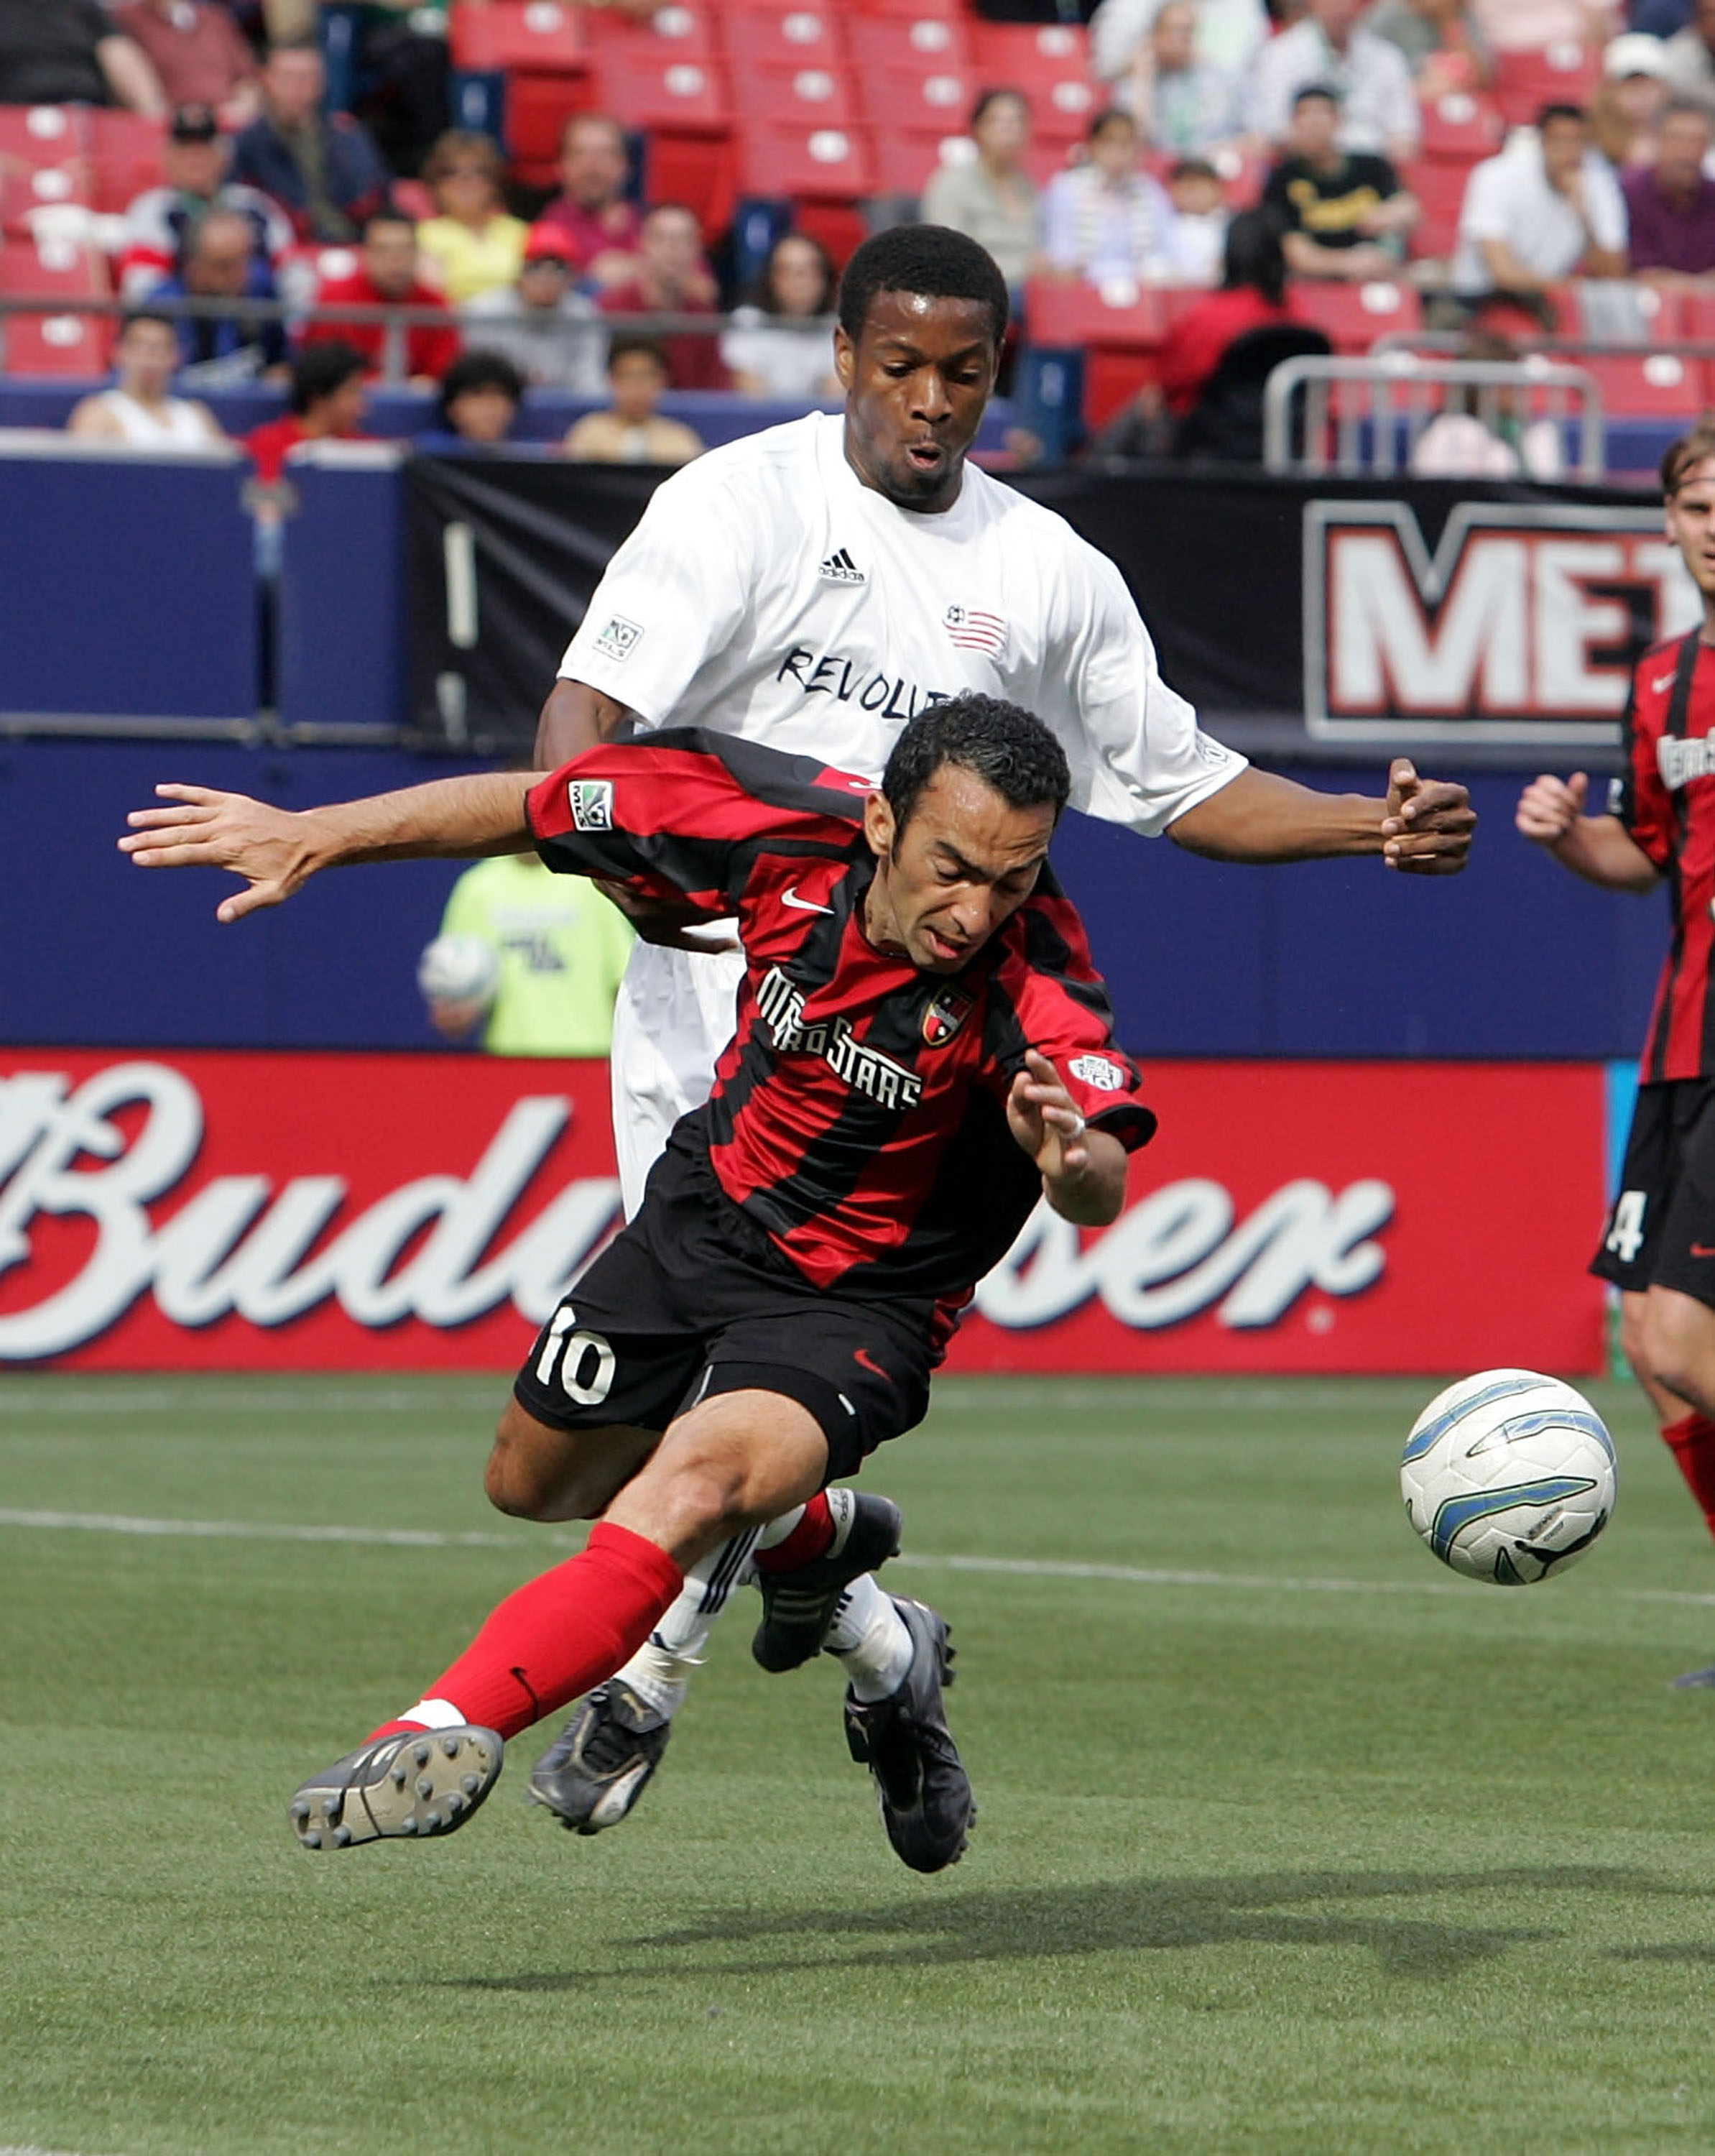 EAST RUTHERFORD, NJ - MAY 21:  Youri Djorkaeff #10 of the Metro Stars is defended by Avery John #4 of the New England Revolution as he tries to play the ball during their Major League Soccer match on May 21, 2005 at Giants Stadium in East Rutherford, New